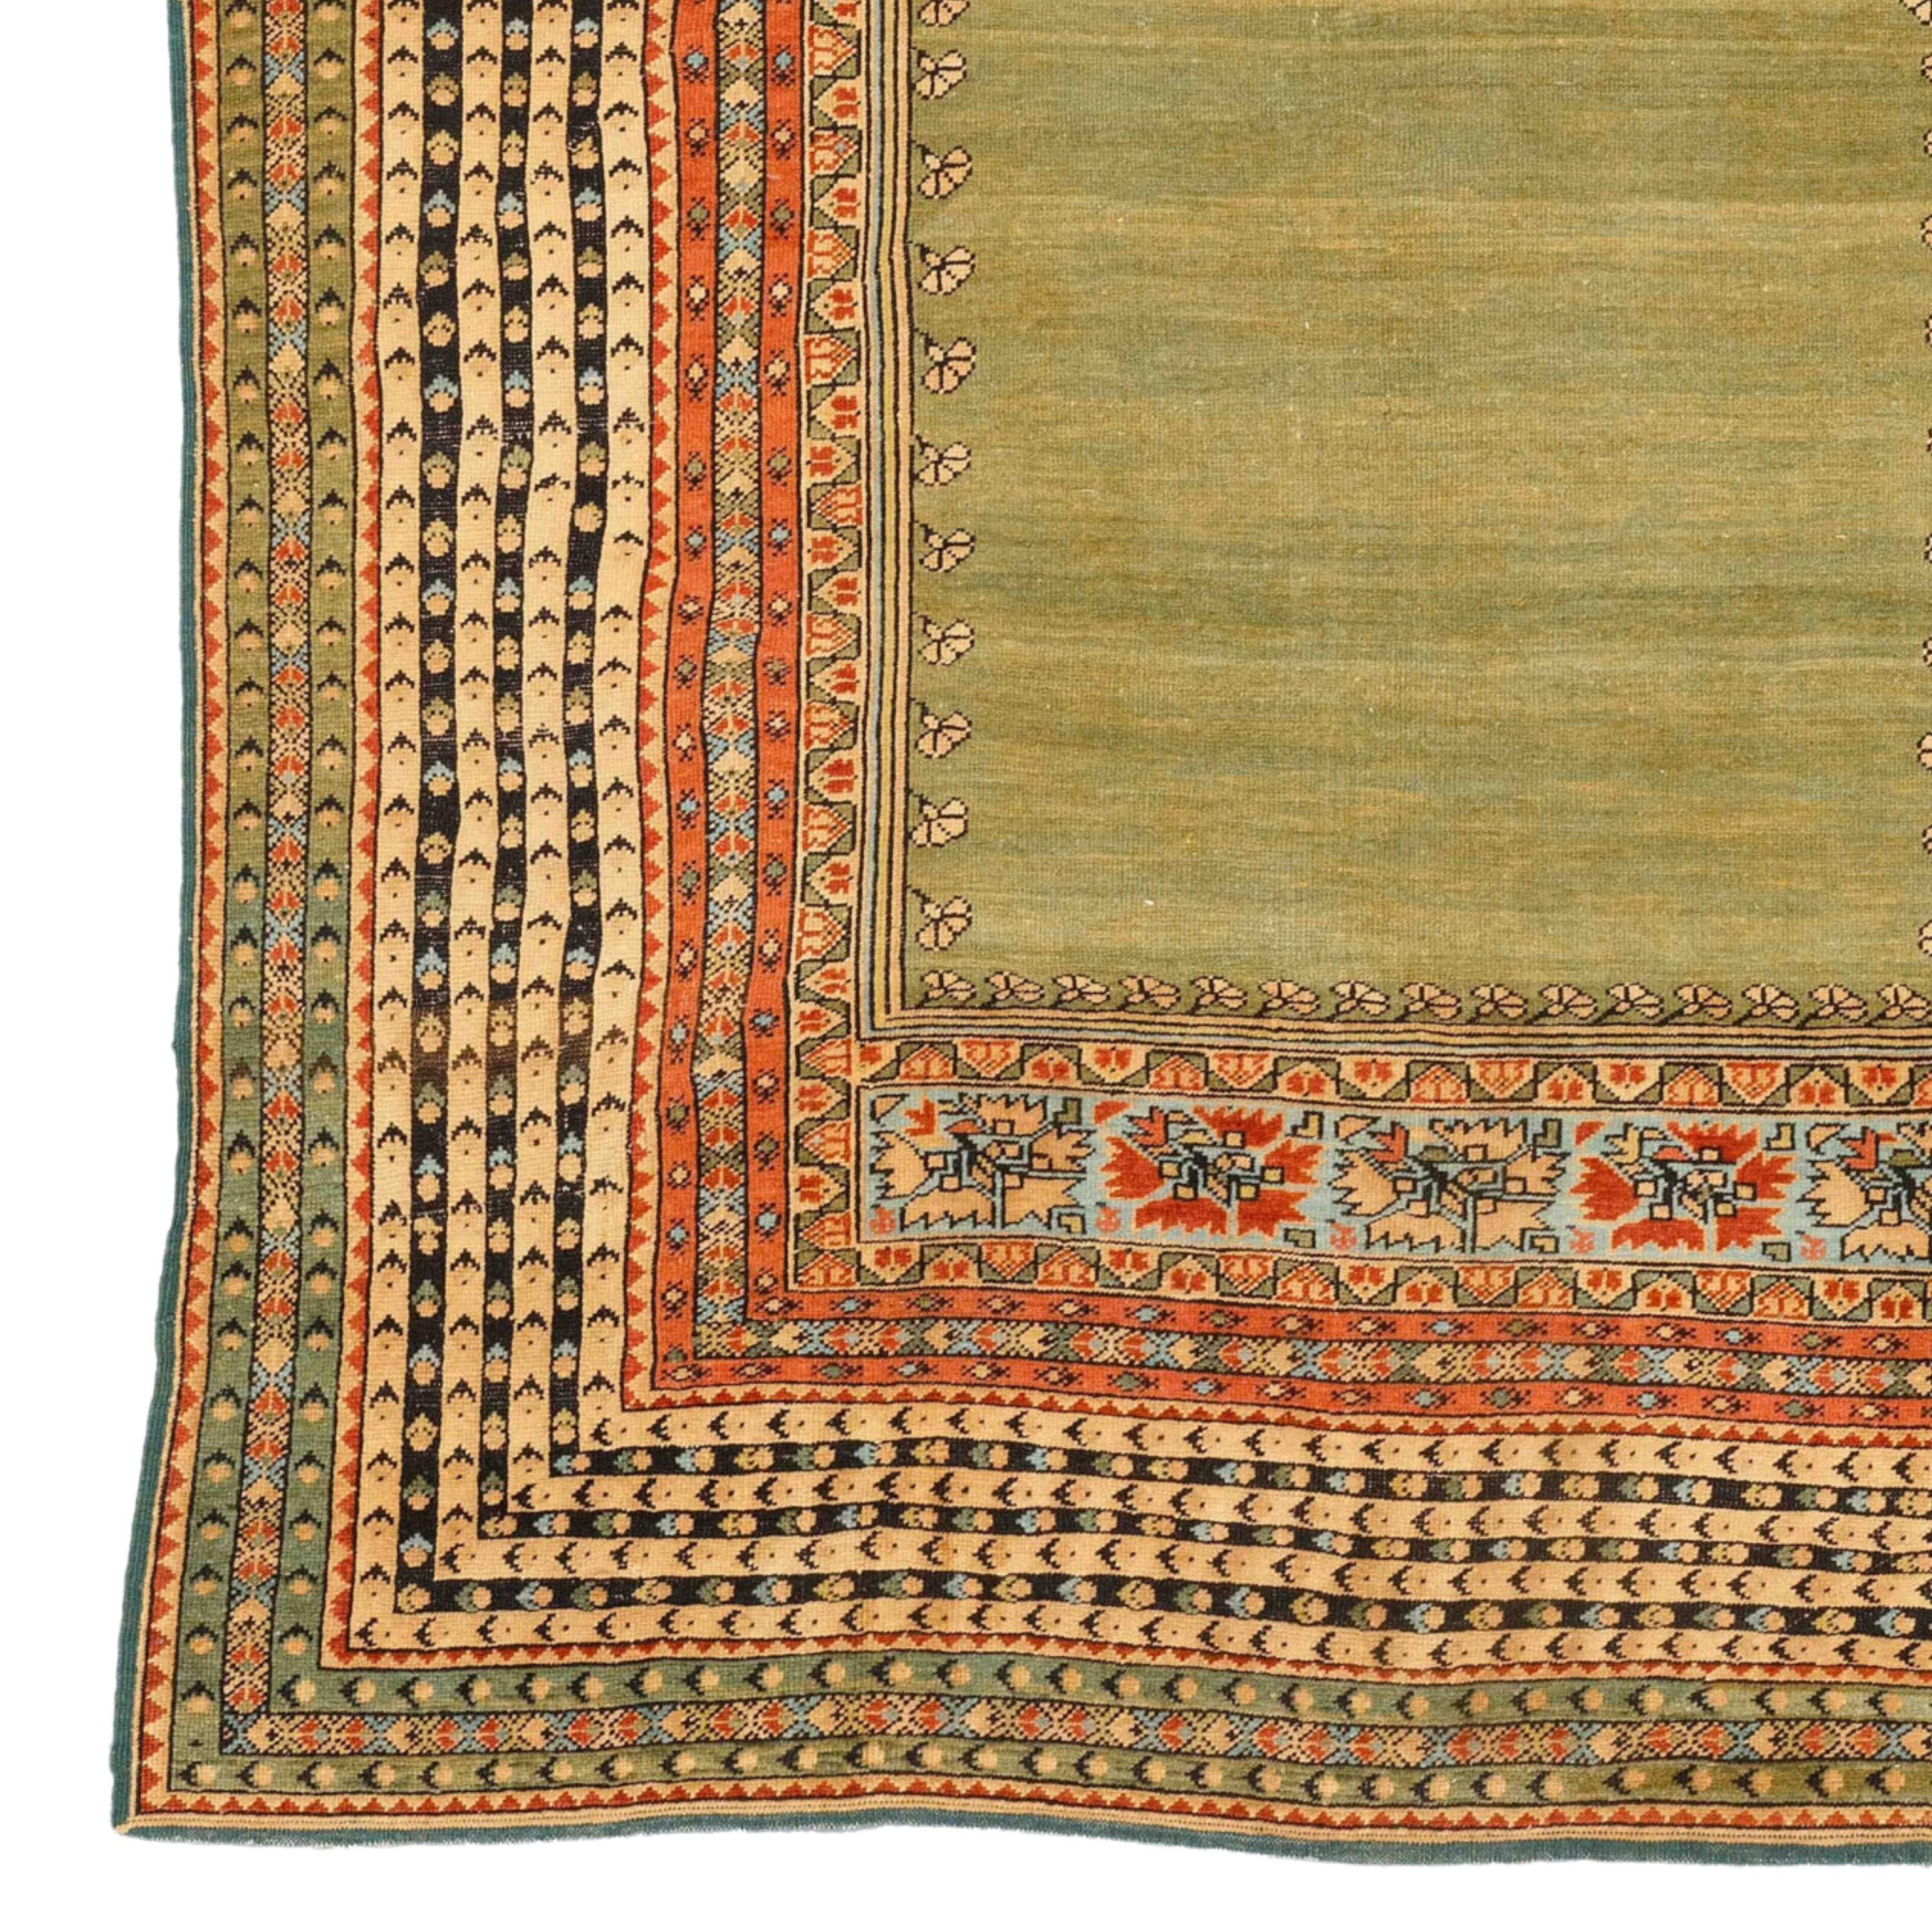 19th Century Anatolian Ghiordes Rug Size 128 × 178 cm (4,19 x 5,83 ft)

Ghiordes carpet, floor covering handwoven in the town of Ghiordes (Gördes), northeast of İzmir in western Anatolia (now in Turkey). The prayer rugs of Ghiordes, together with